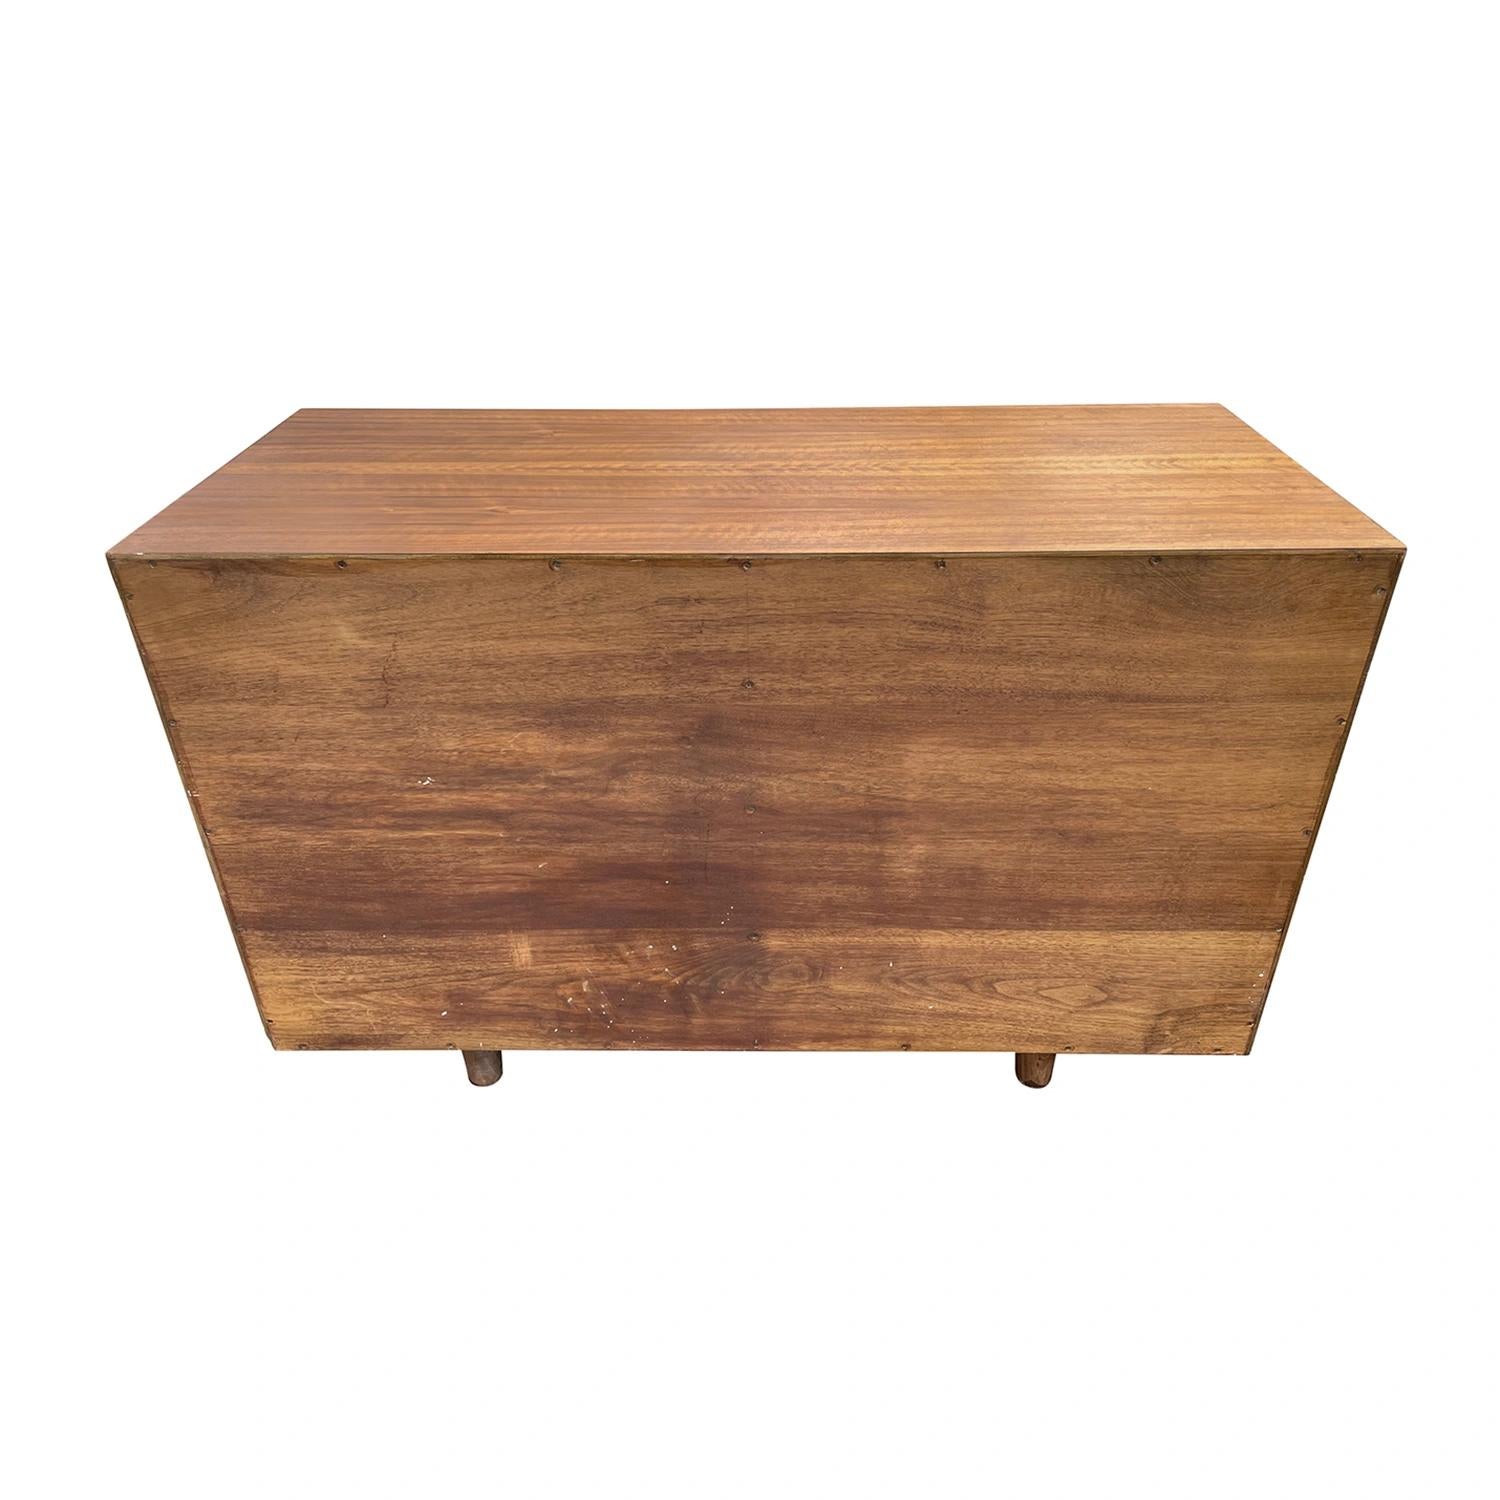 20th Century Brown Italian Walnut M. Singer & Sons Dresser, Cabinet by Gio Ponti For Sale 6